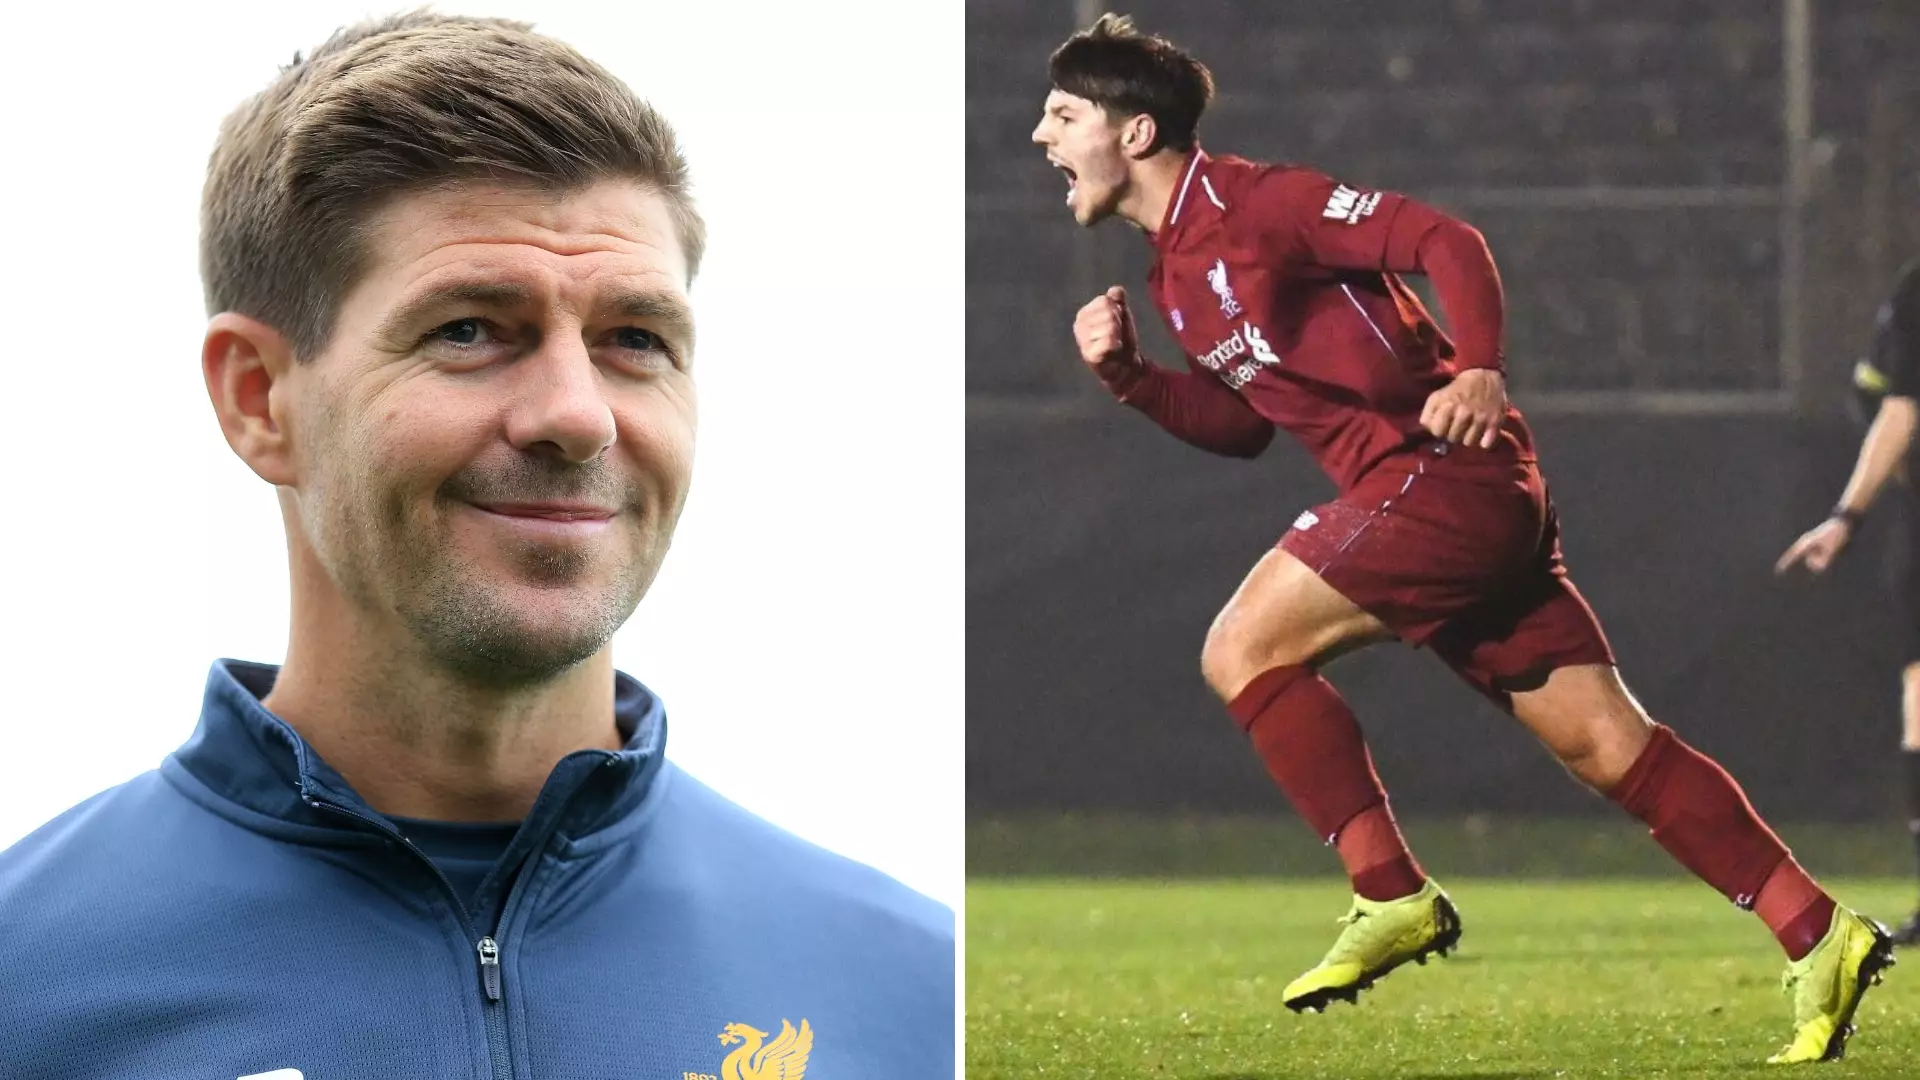 Steven Gerrard's Cousin Bobby Duncan Is Making A Name For Himself At Liverpool